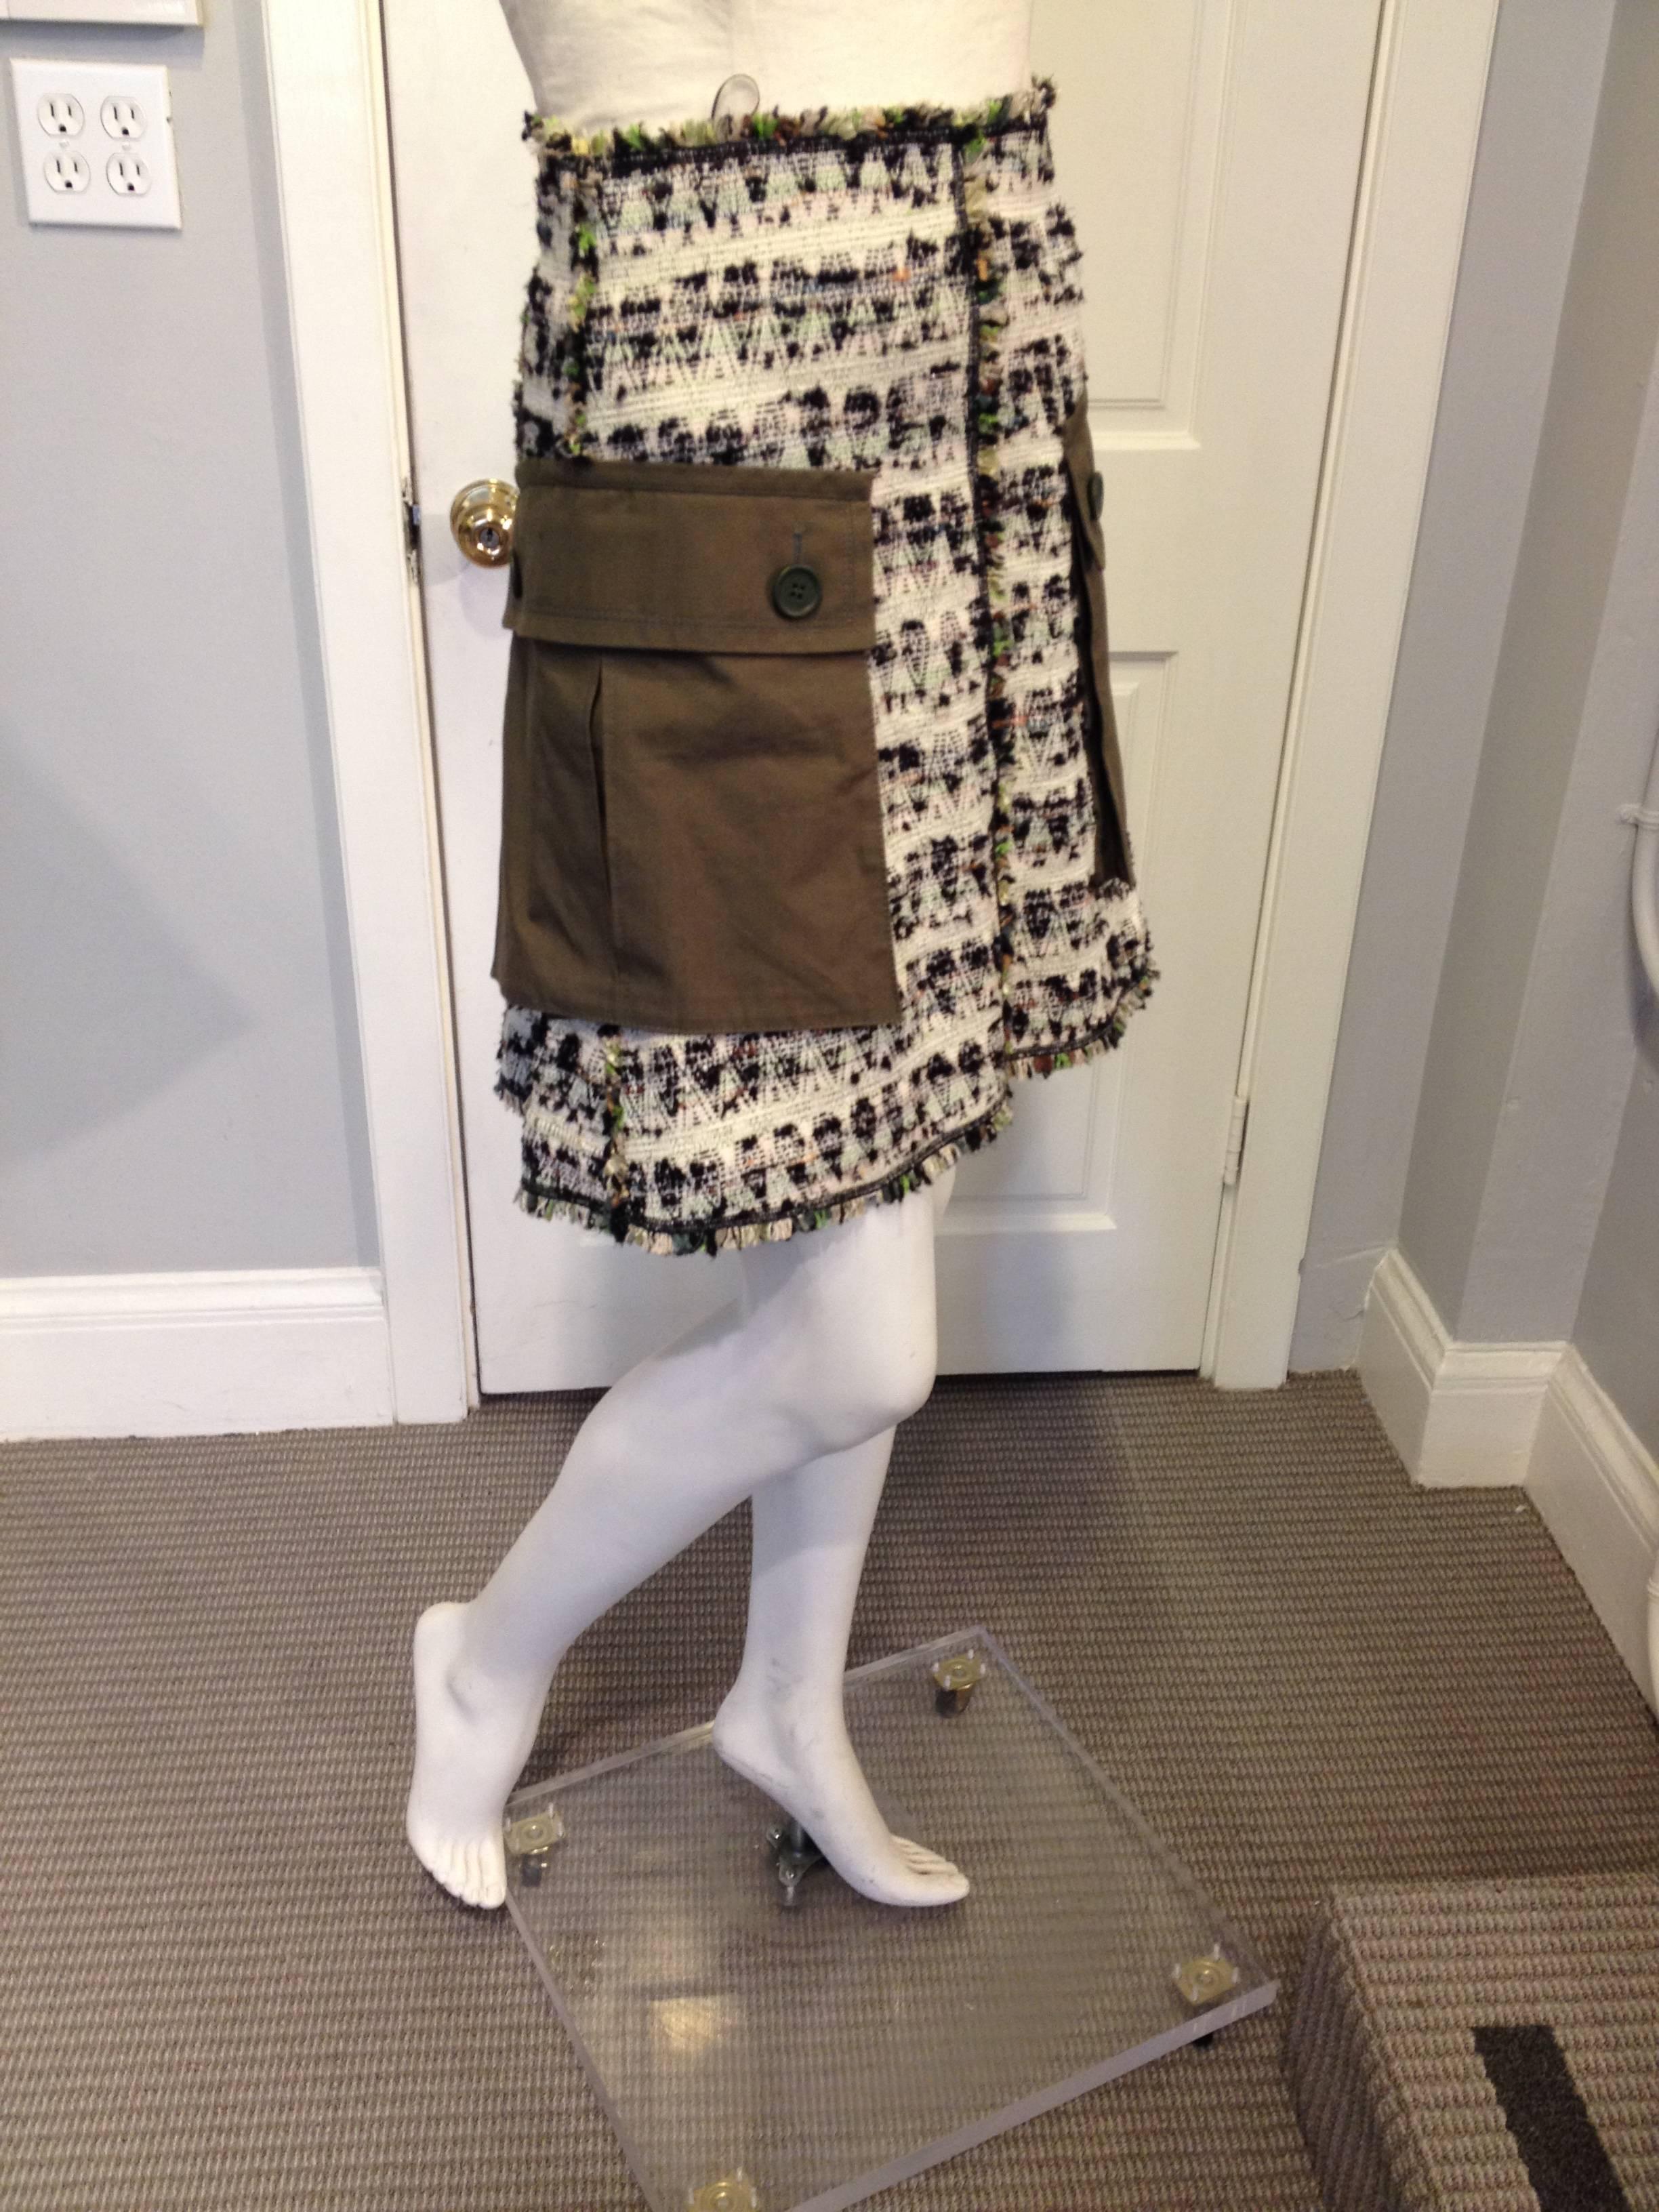 This Louis Vuitton skirt takes inspiration from the army and makes it chic. It's made out of a cream tweed lined with black threads and sprinkled with flecks of green, olive, caramel, and brown. The a-line shape is accentuated by voluminous oversize